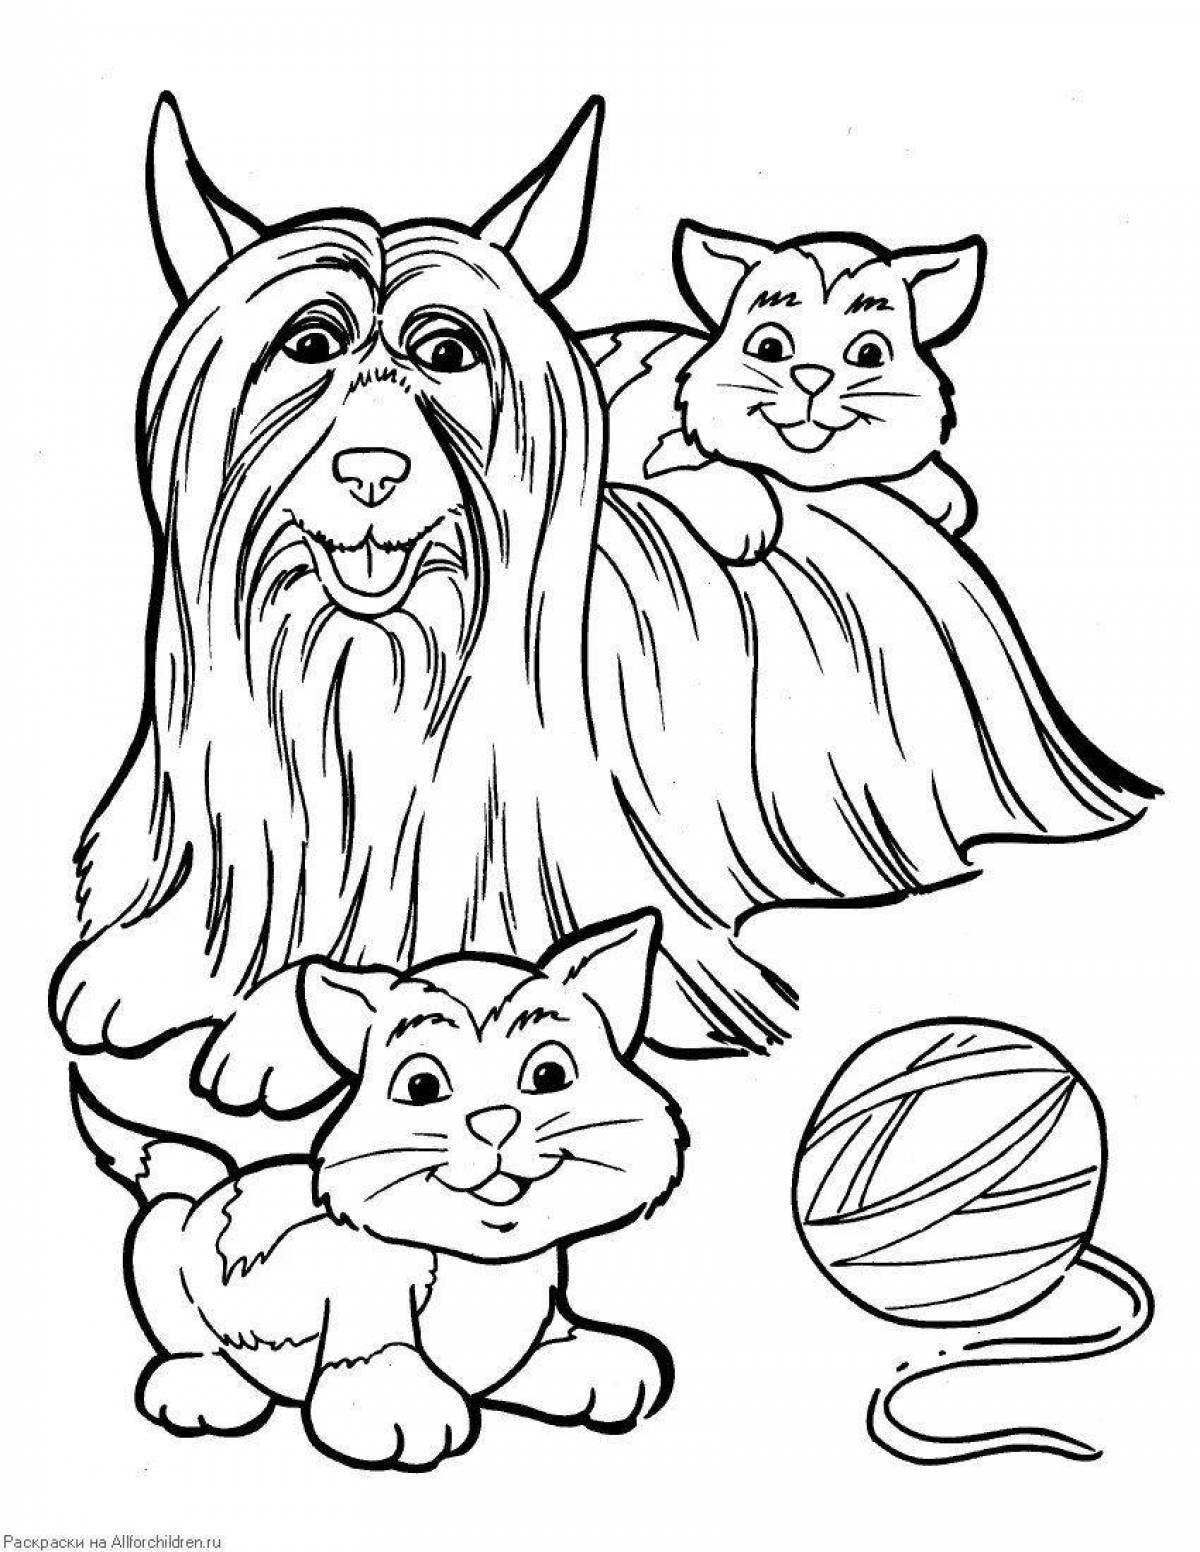 Adorable dog and cat coloring book for kids